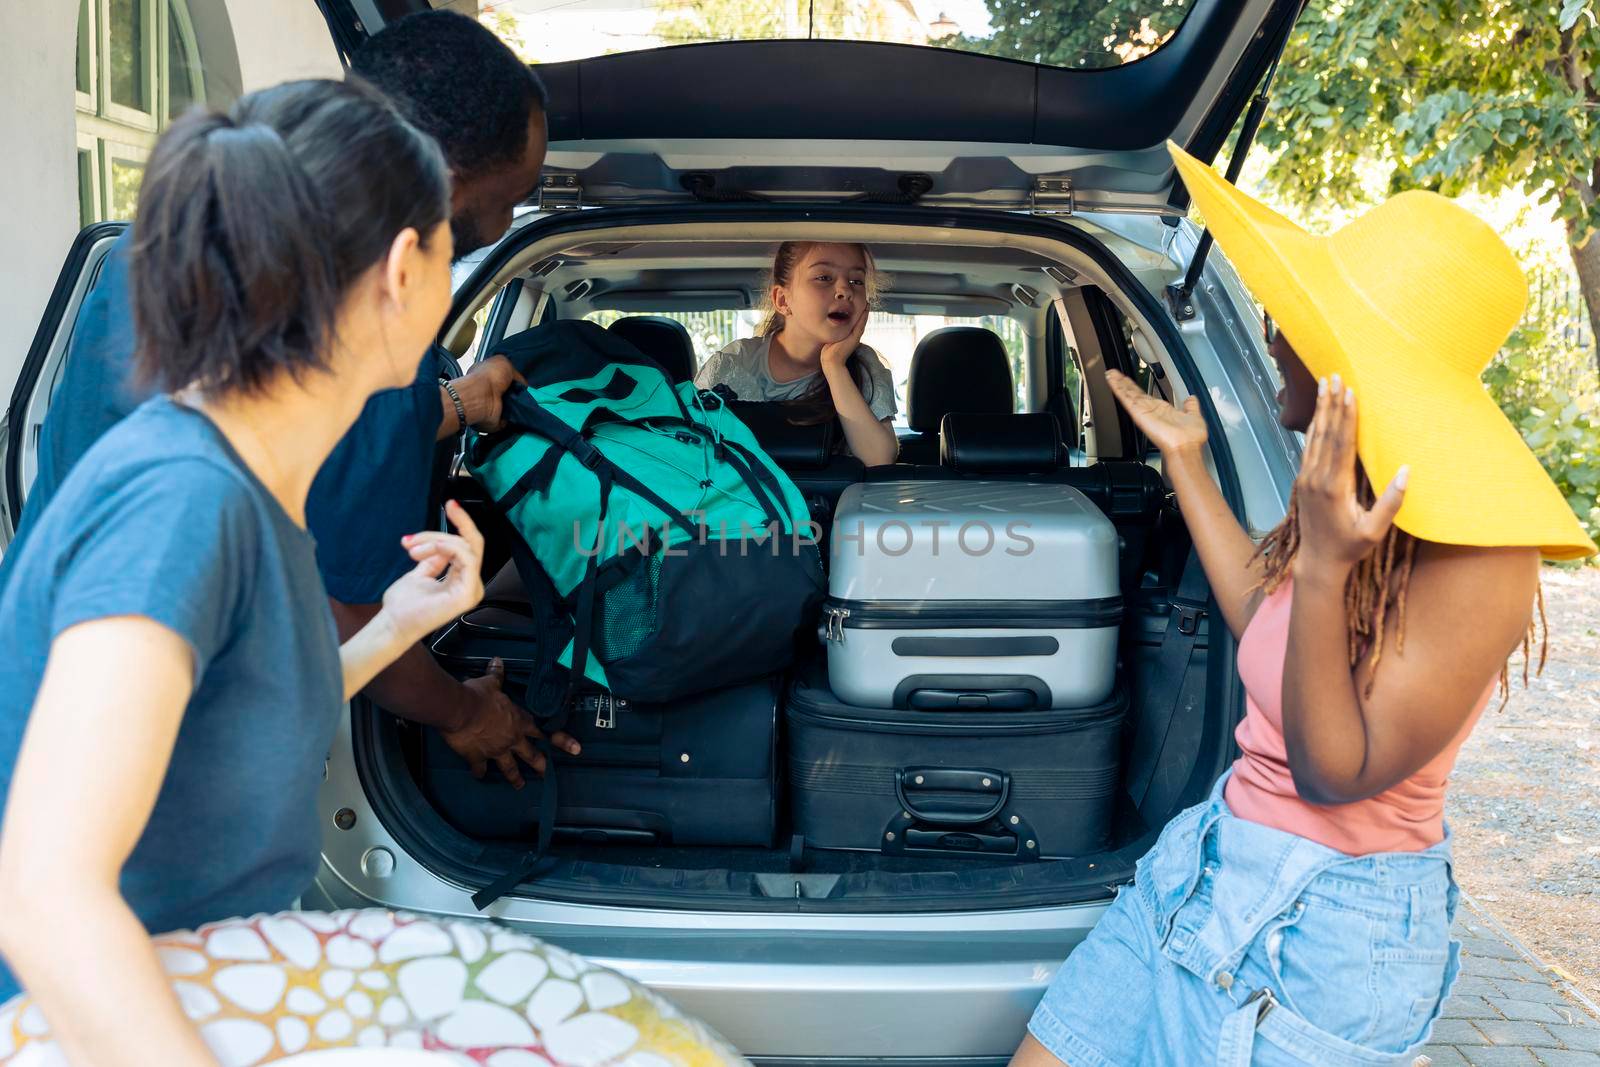 Little girl and diverse people going on vacation, loading travel bags in vehicle trunk. Leaving on holiday adventure with family and friends, putting suitcase or trolley in automobile before roadtrip.